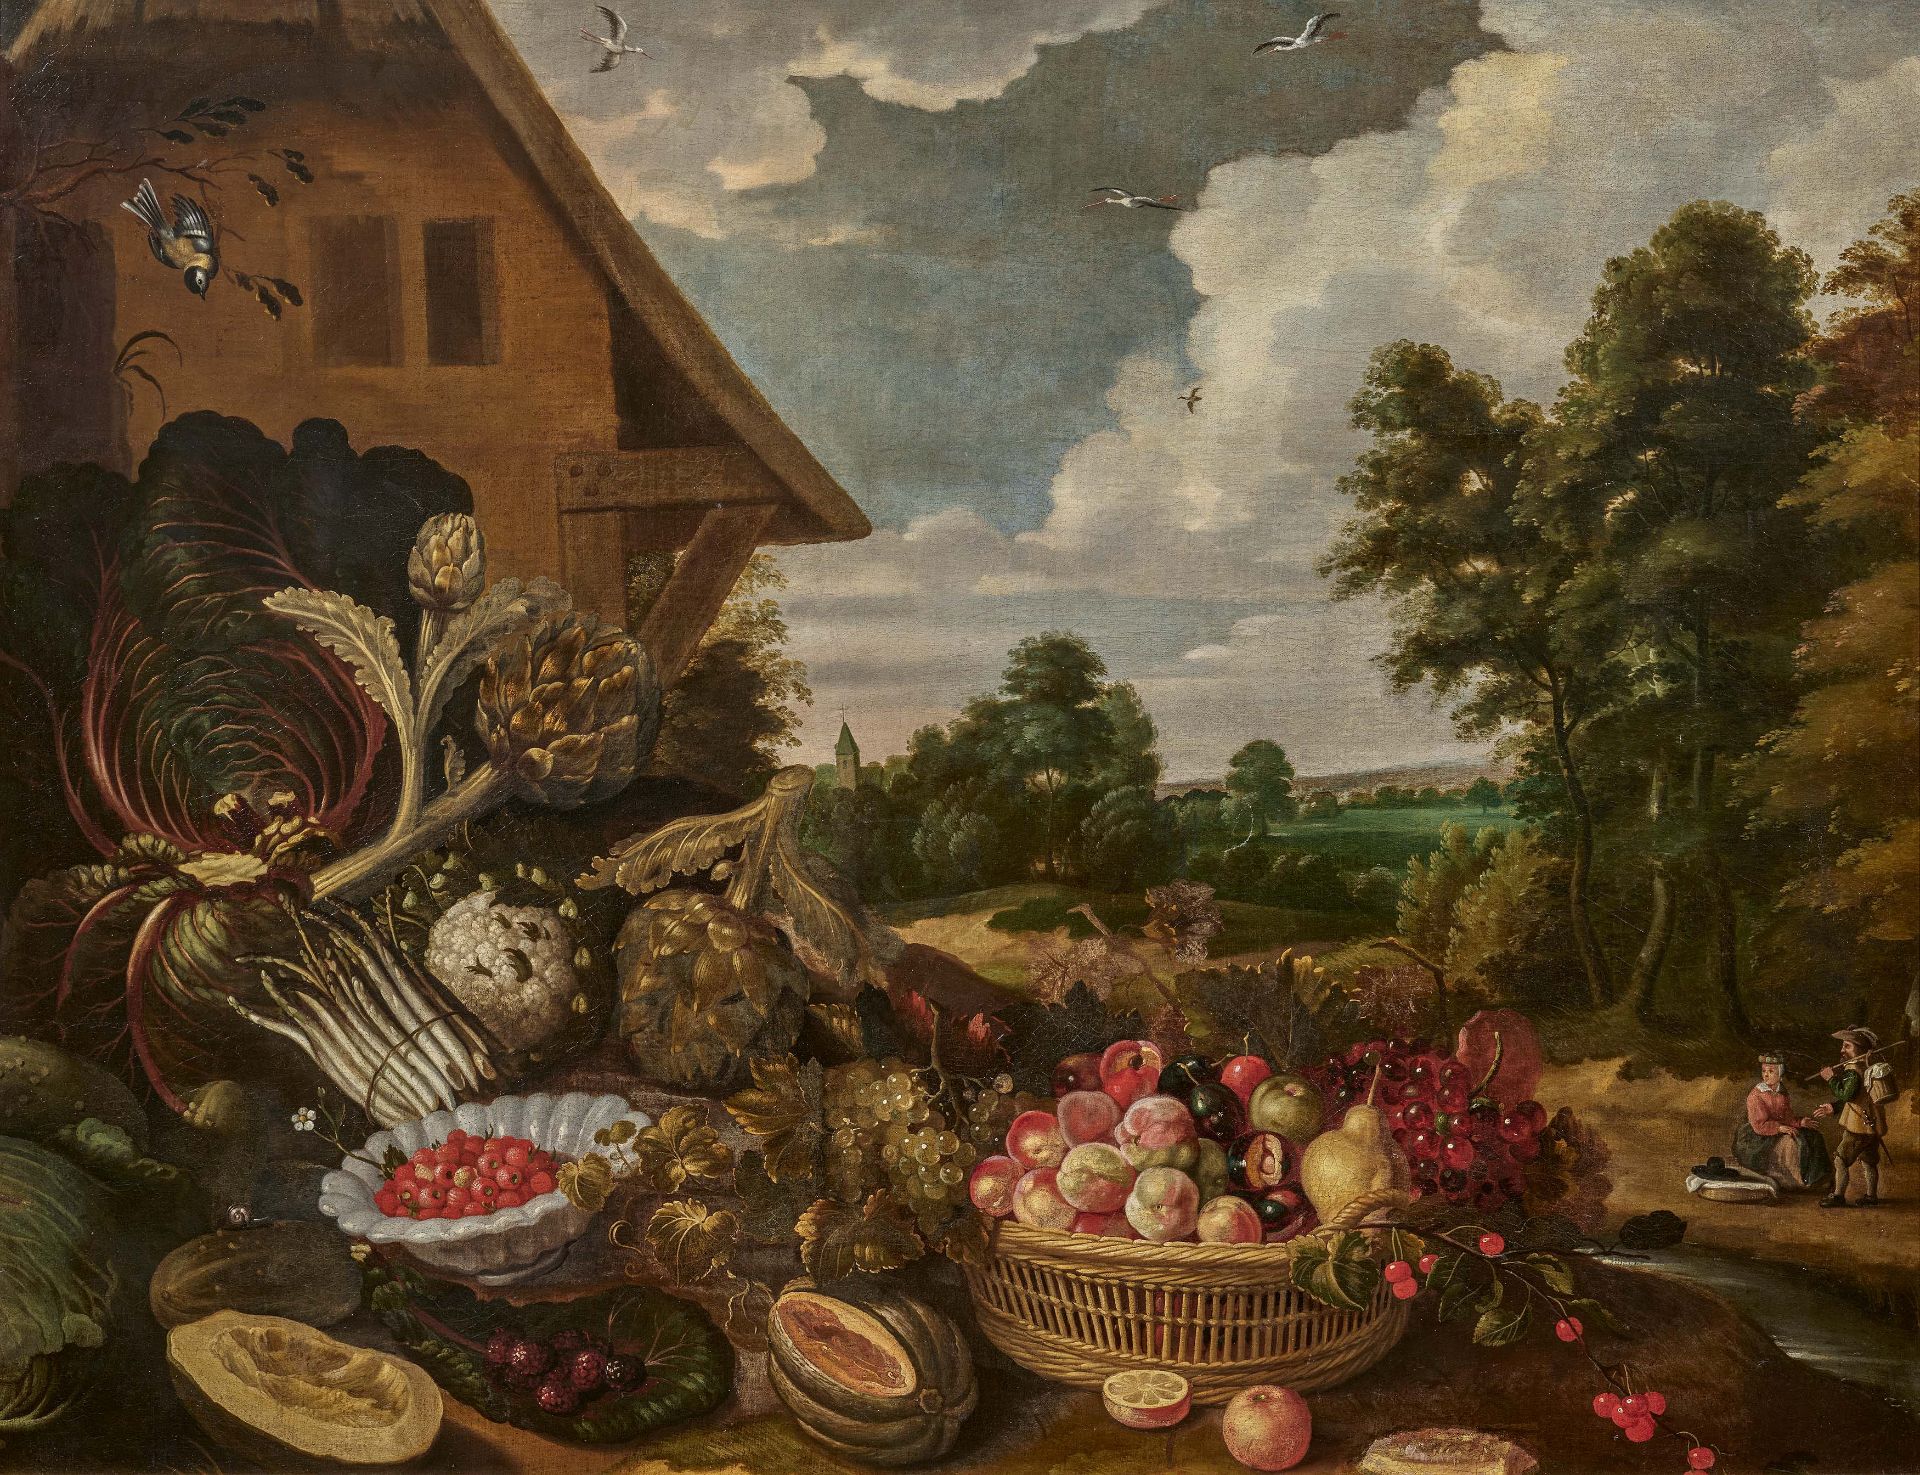 Gommaert van der Gracht: Large Still Life with Fruits and Vegetables in Front of a Farmhouse